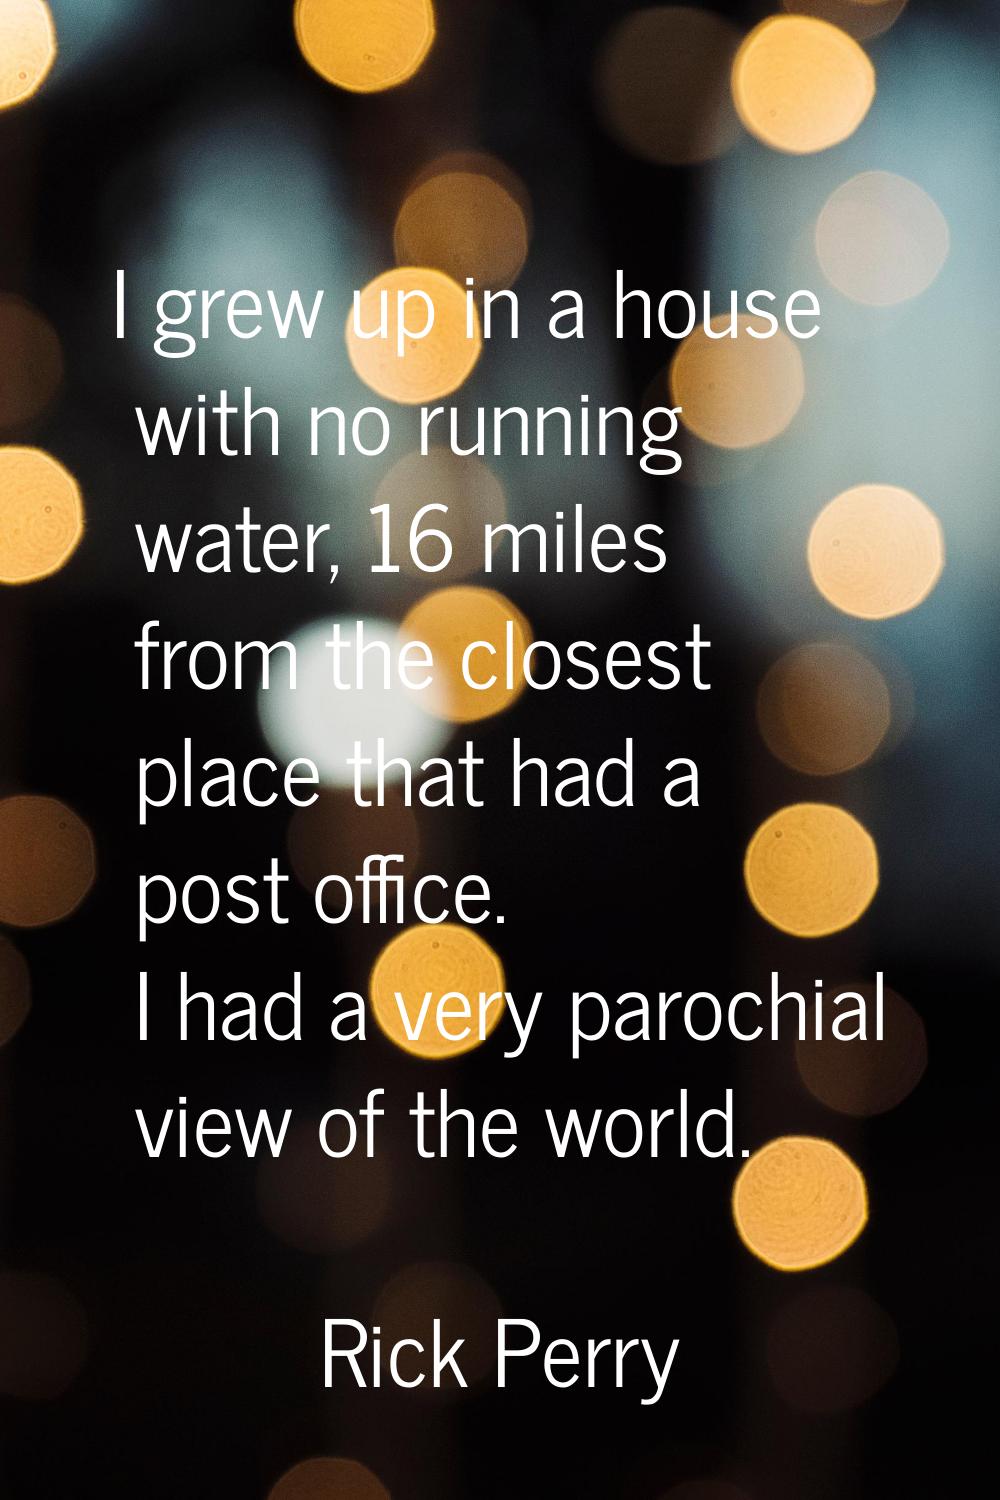 I grew up in a house with no running water, 16 miles from the closest place that had a post office.